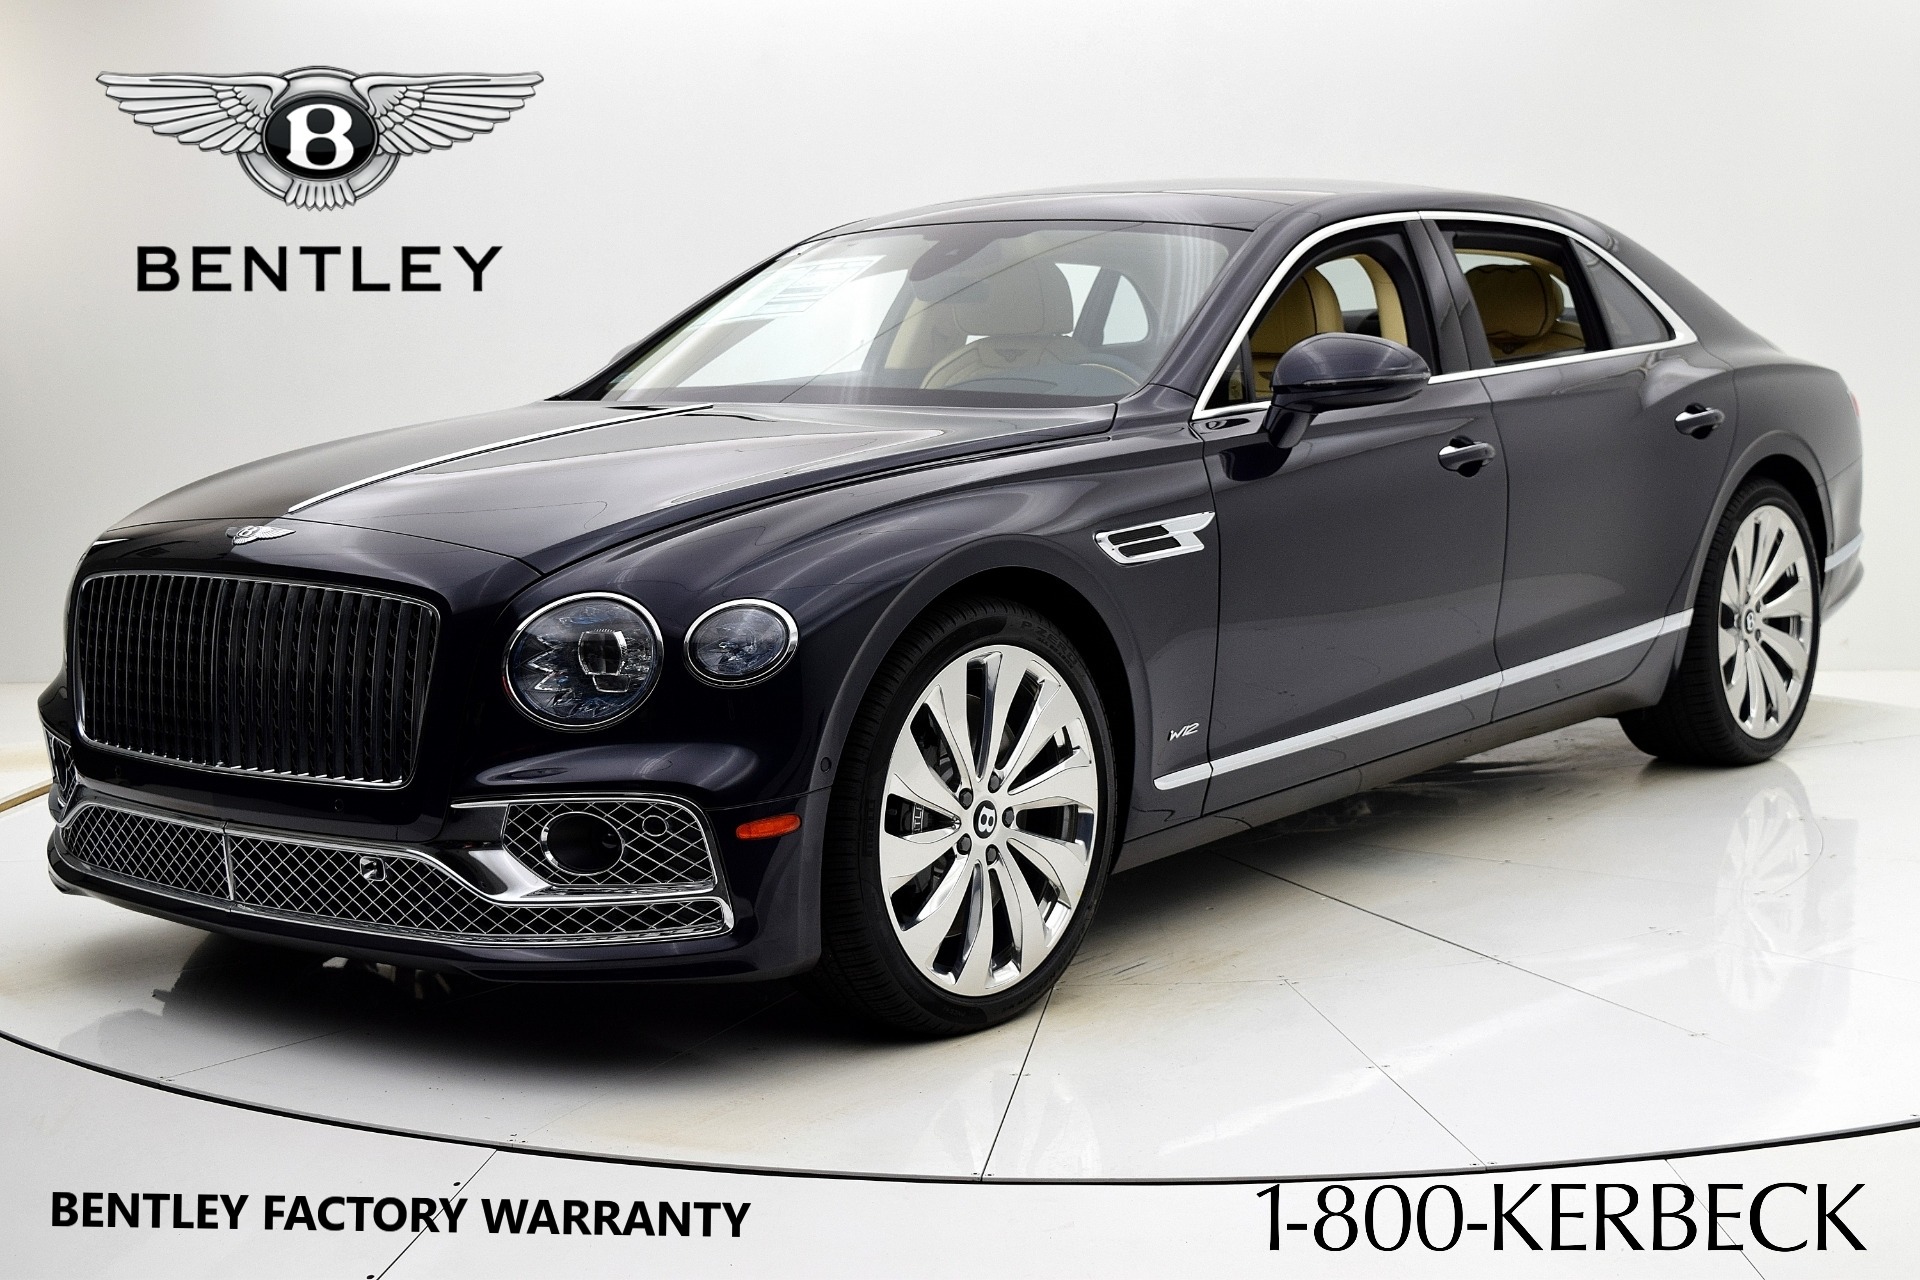 Used 2020 Bentley Flying Spur W12 / LEASE OPTIONS AVAILABLE for sale $239,000 at Bentley Palmyra N.J. in Palmyra NJ 08065 2